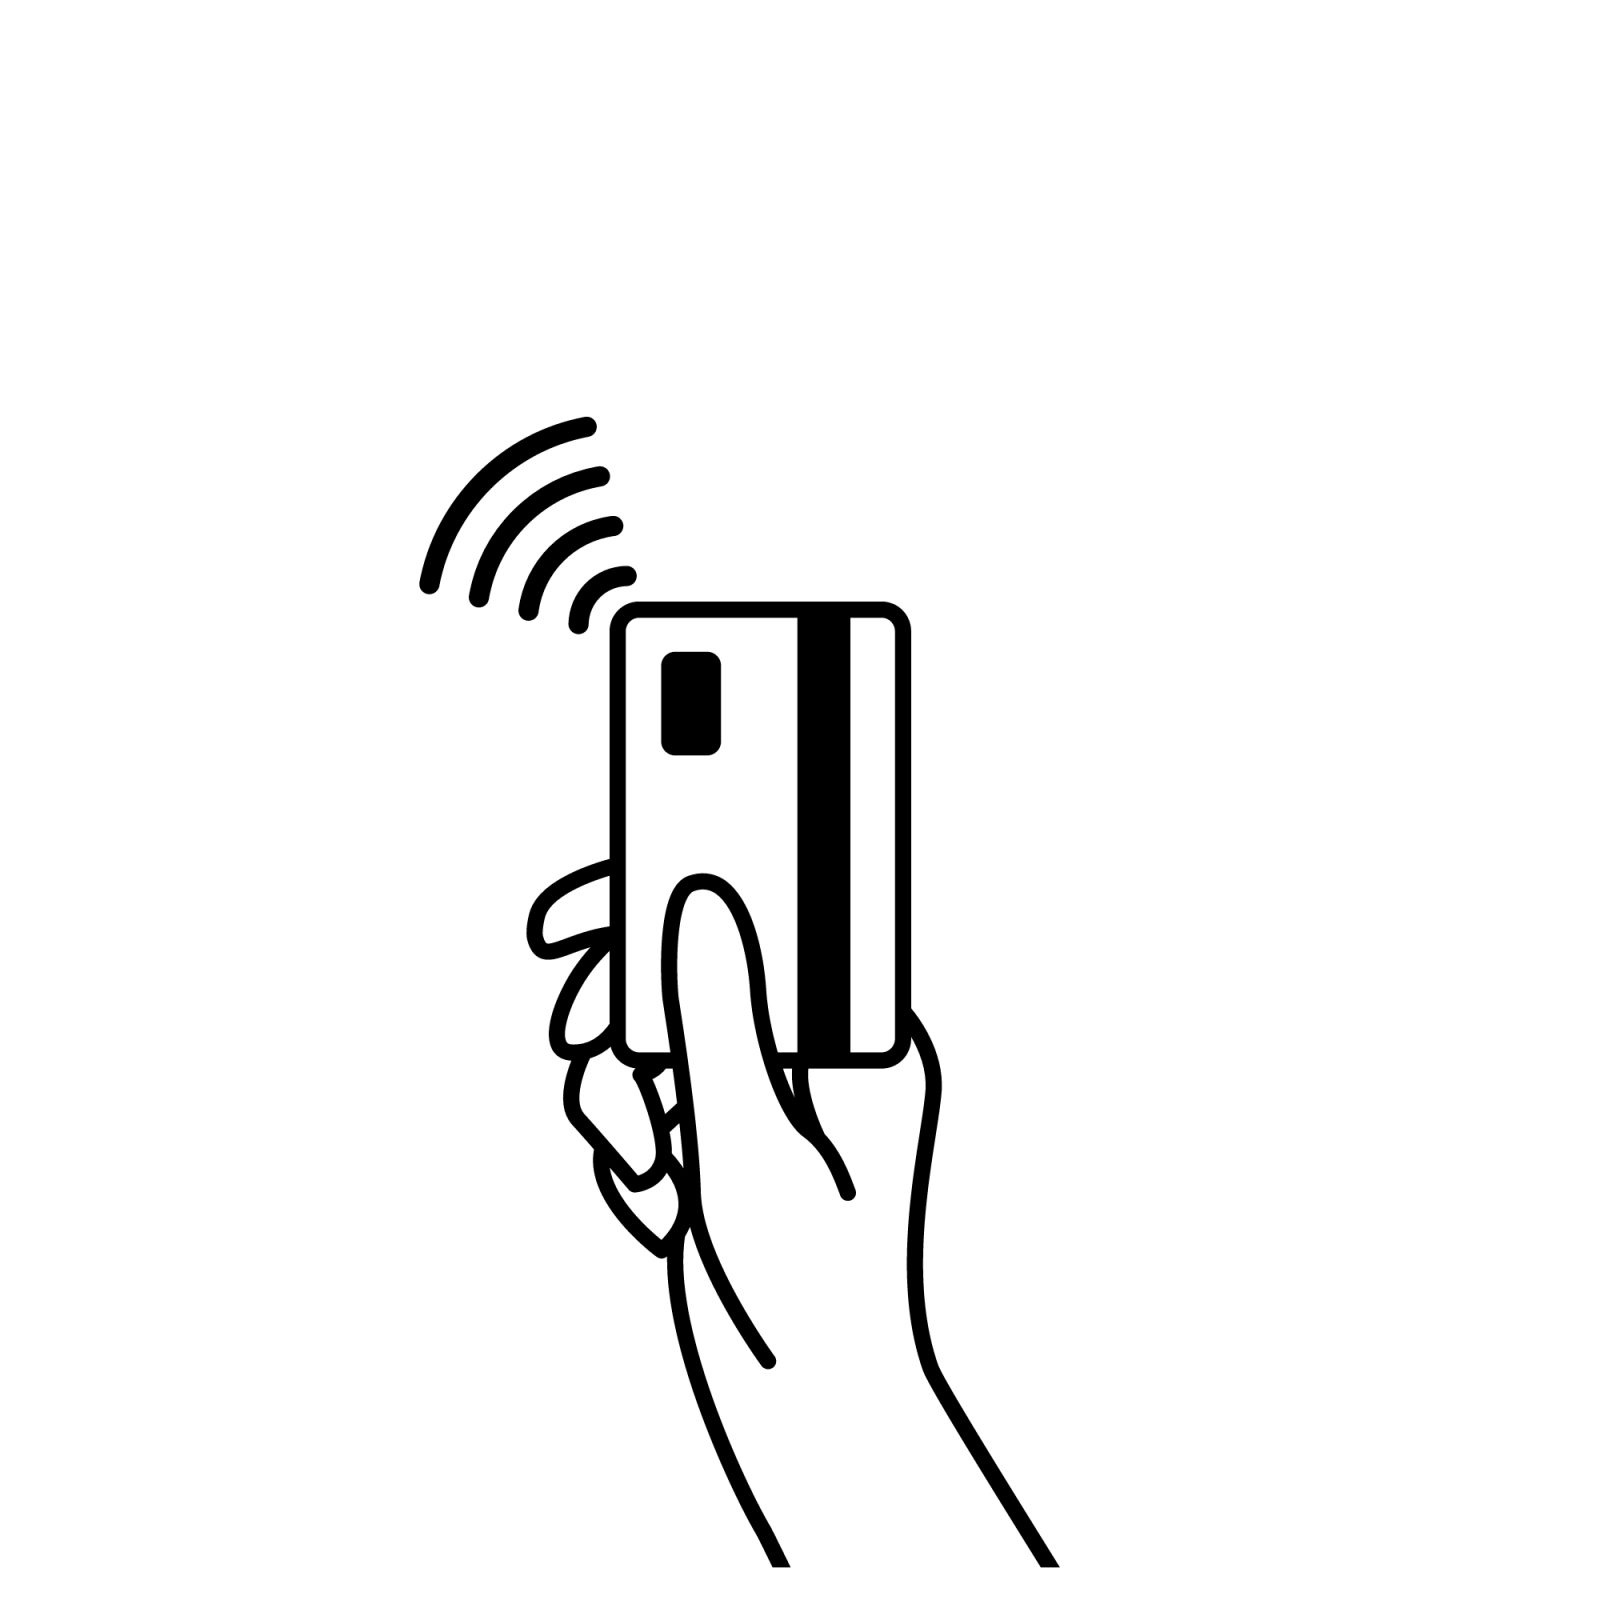 A hand holding a card with a wifi symbol coming out of the card to symbolize contactless payments.